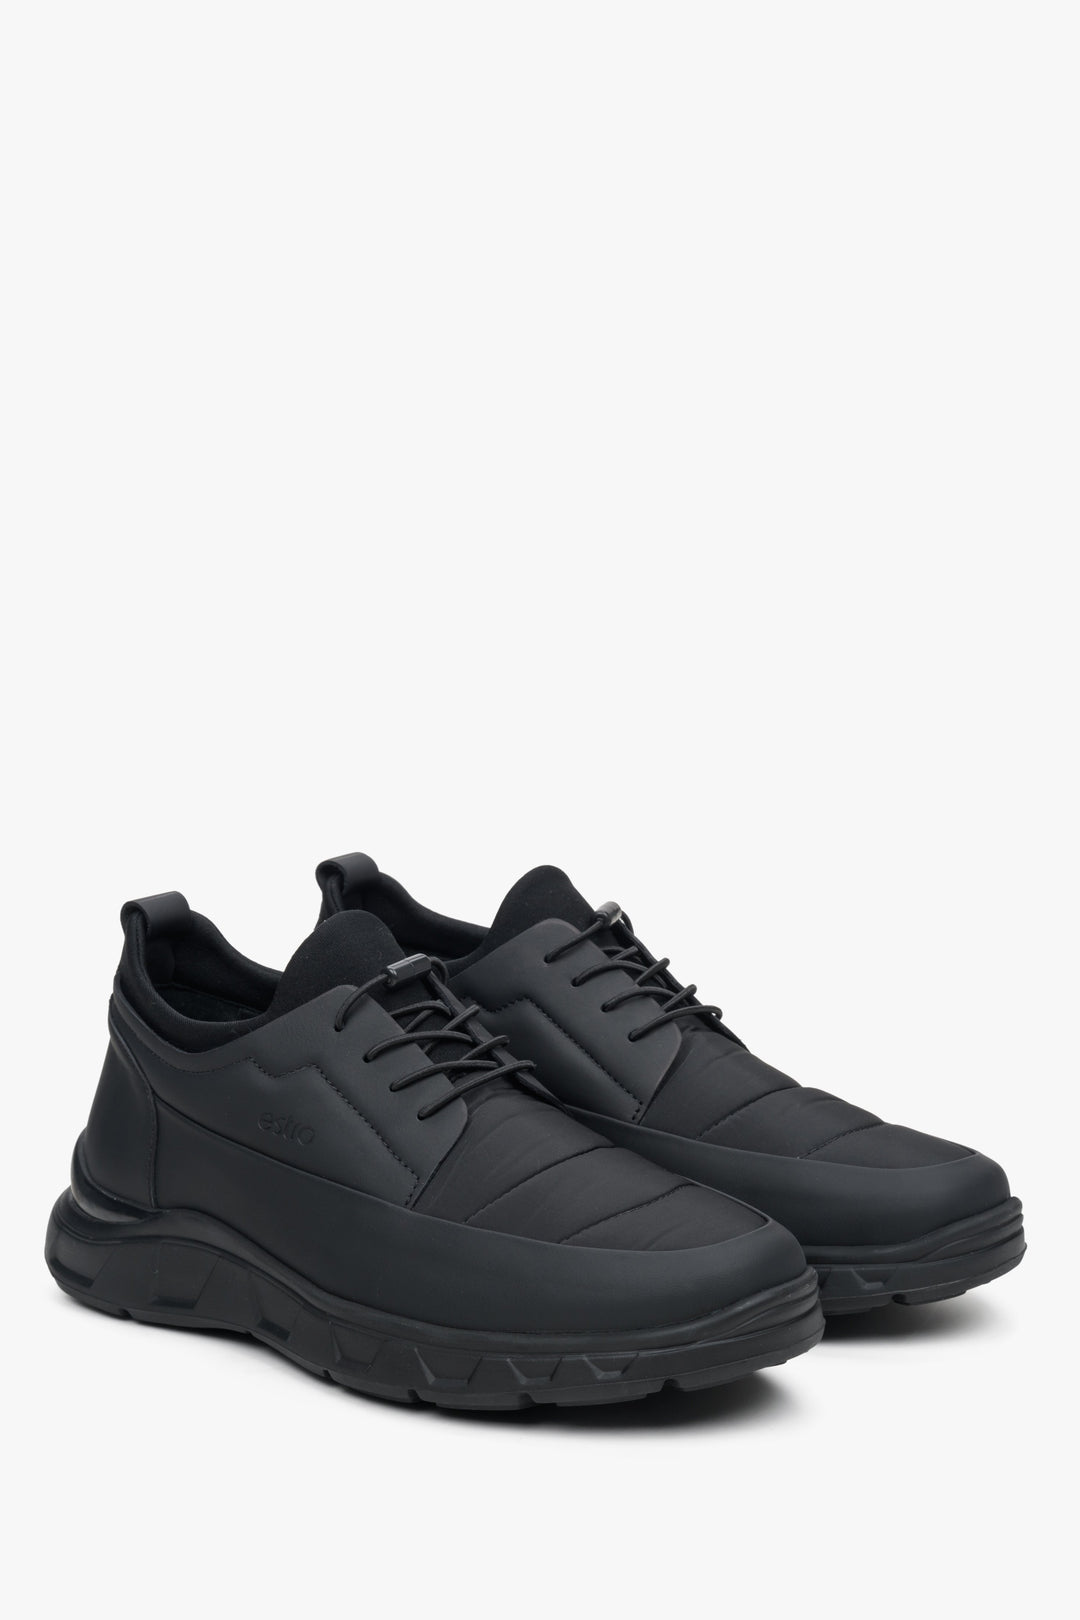 Soft men's black sneakers with a turnbuckleby Estro.